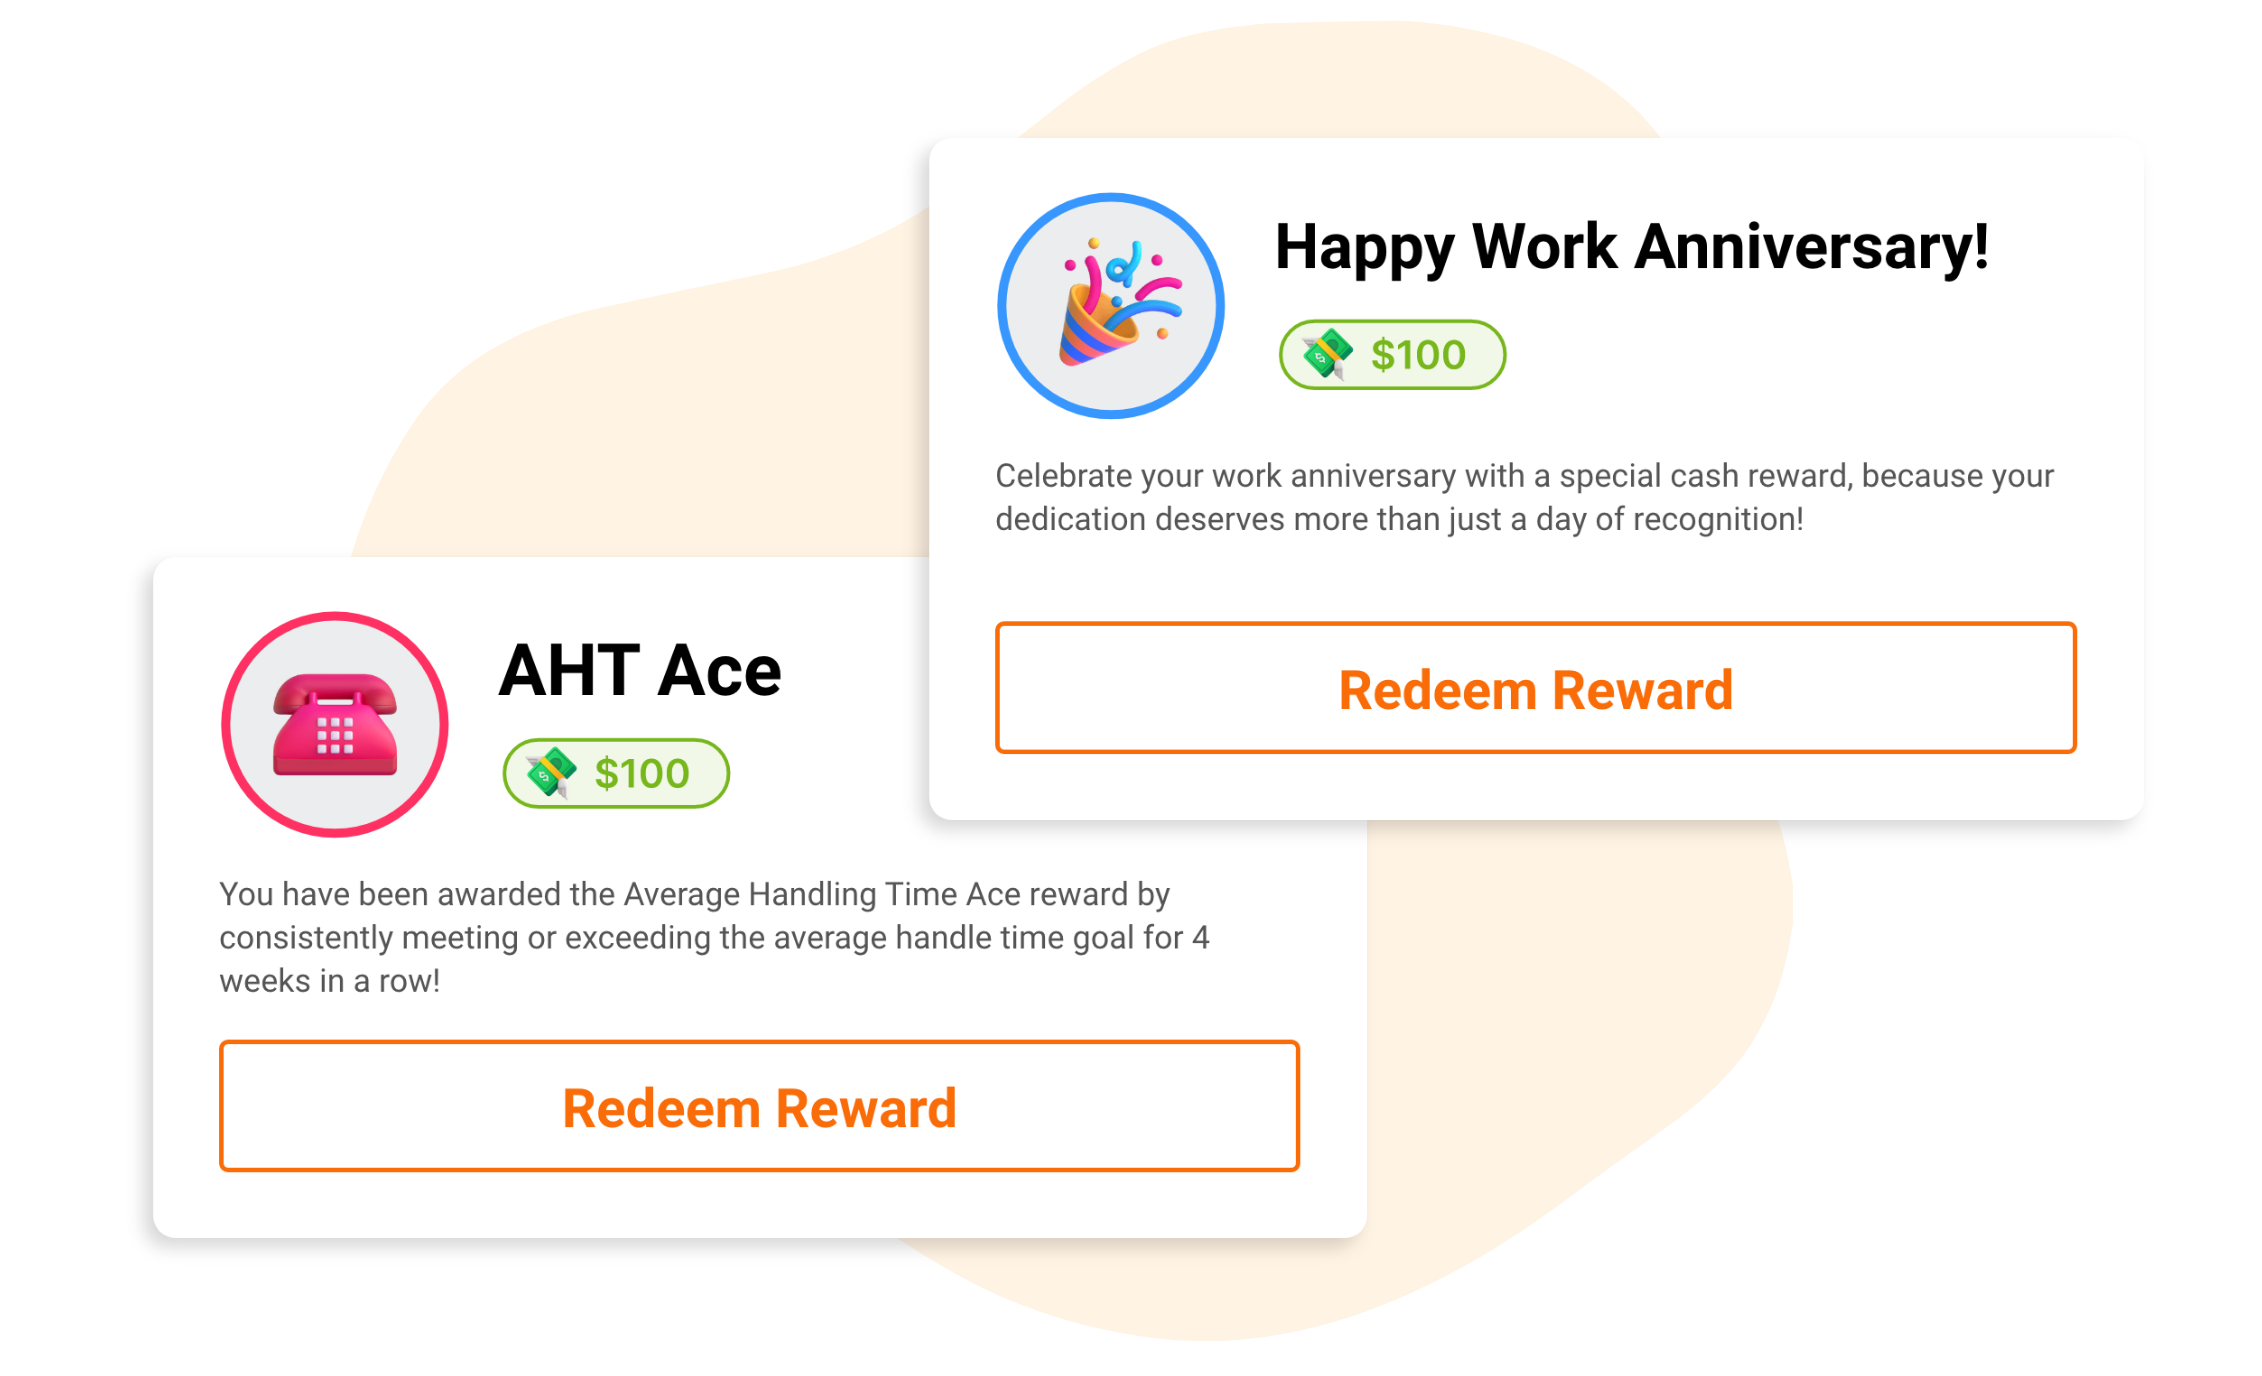 A joyous work anniversary celebration filled with recognition and rewarding surprises.